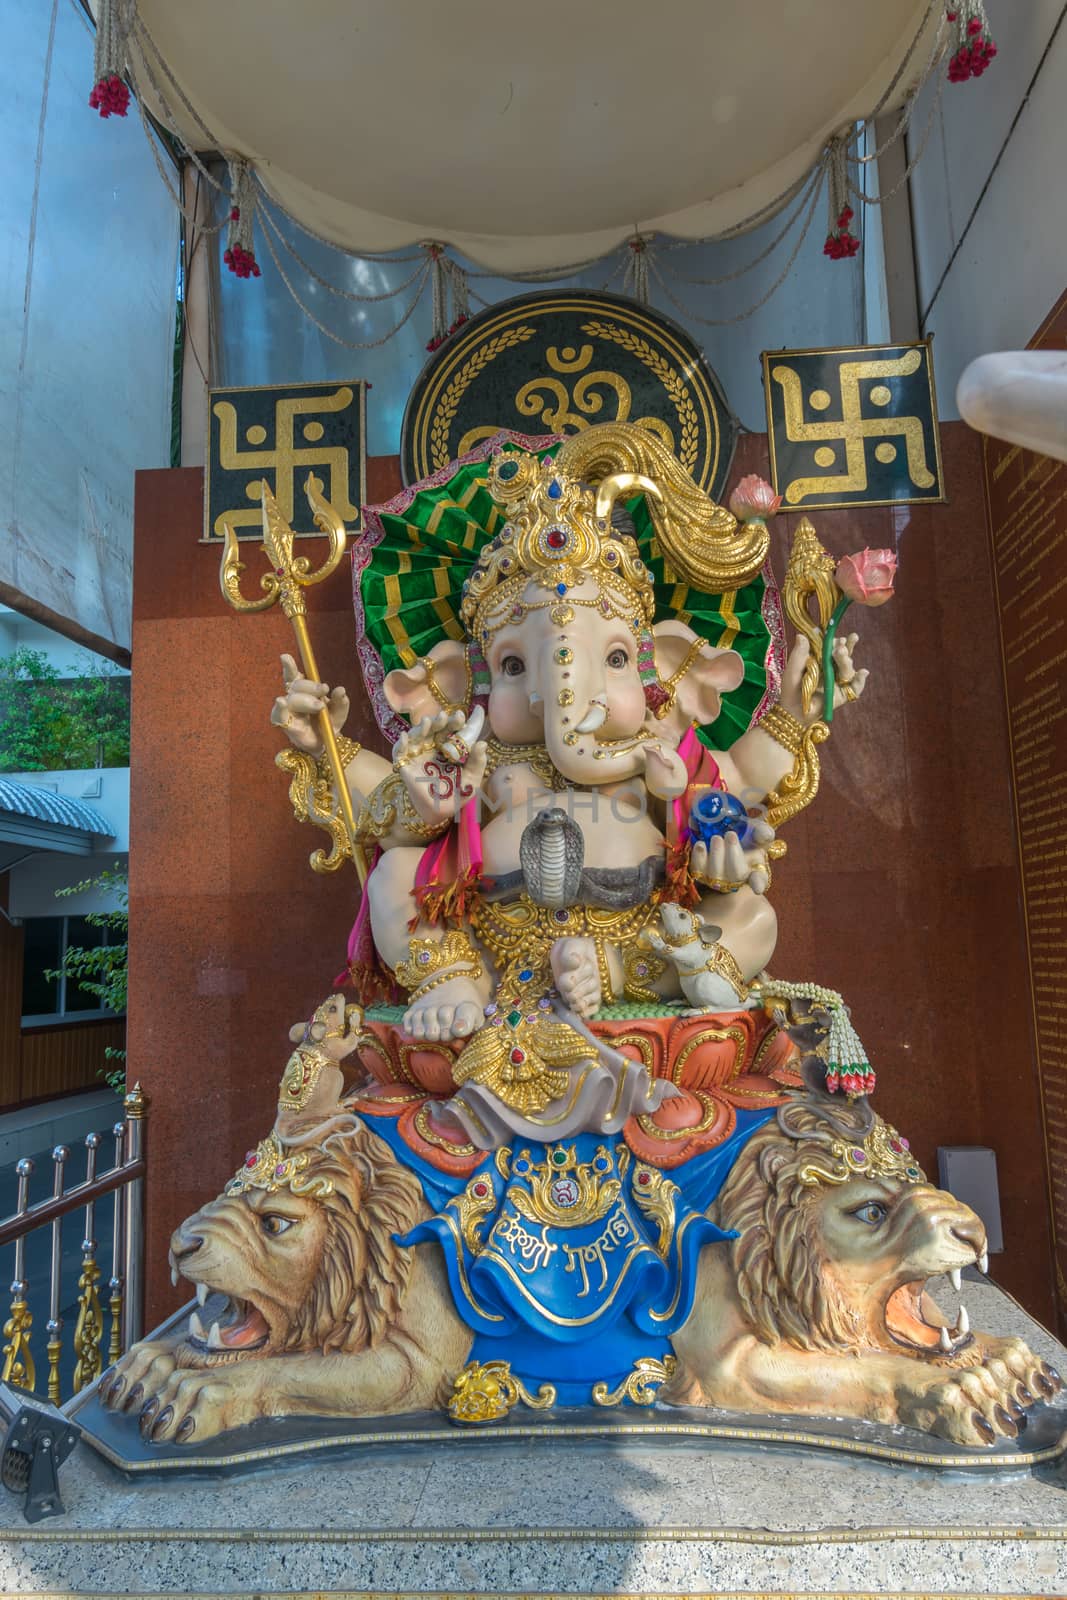 Bangkok, Thailand - March 6, 2016 : Ganesha also known as Ganapati and Vinayaka, is one of the best-known and most worshipped deities in the Hindu pantheon.